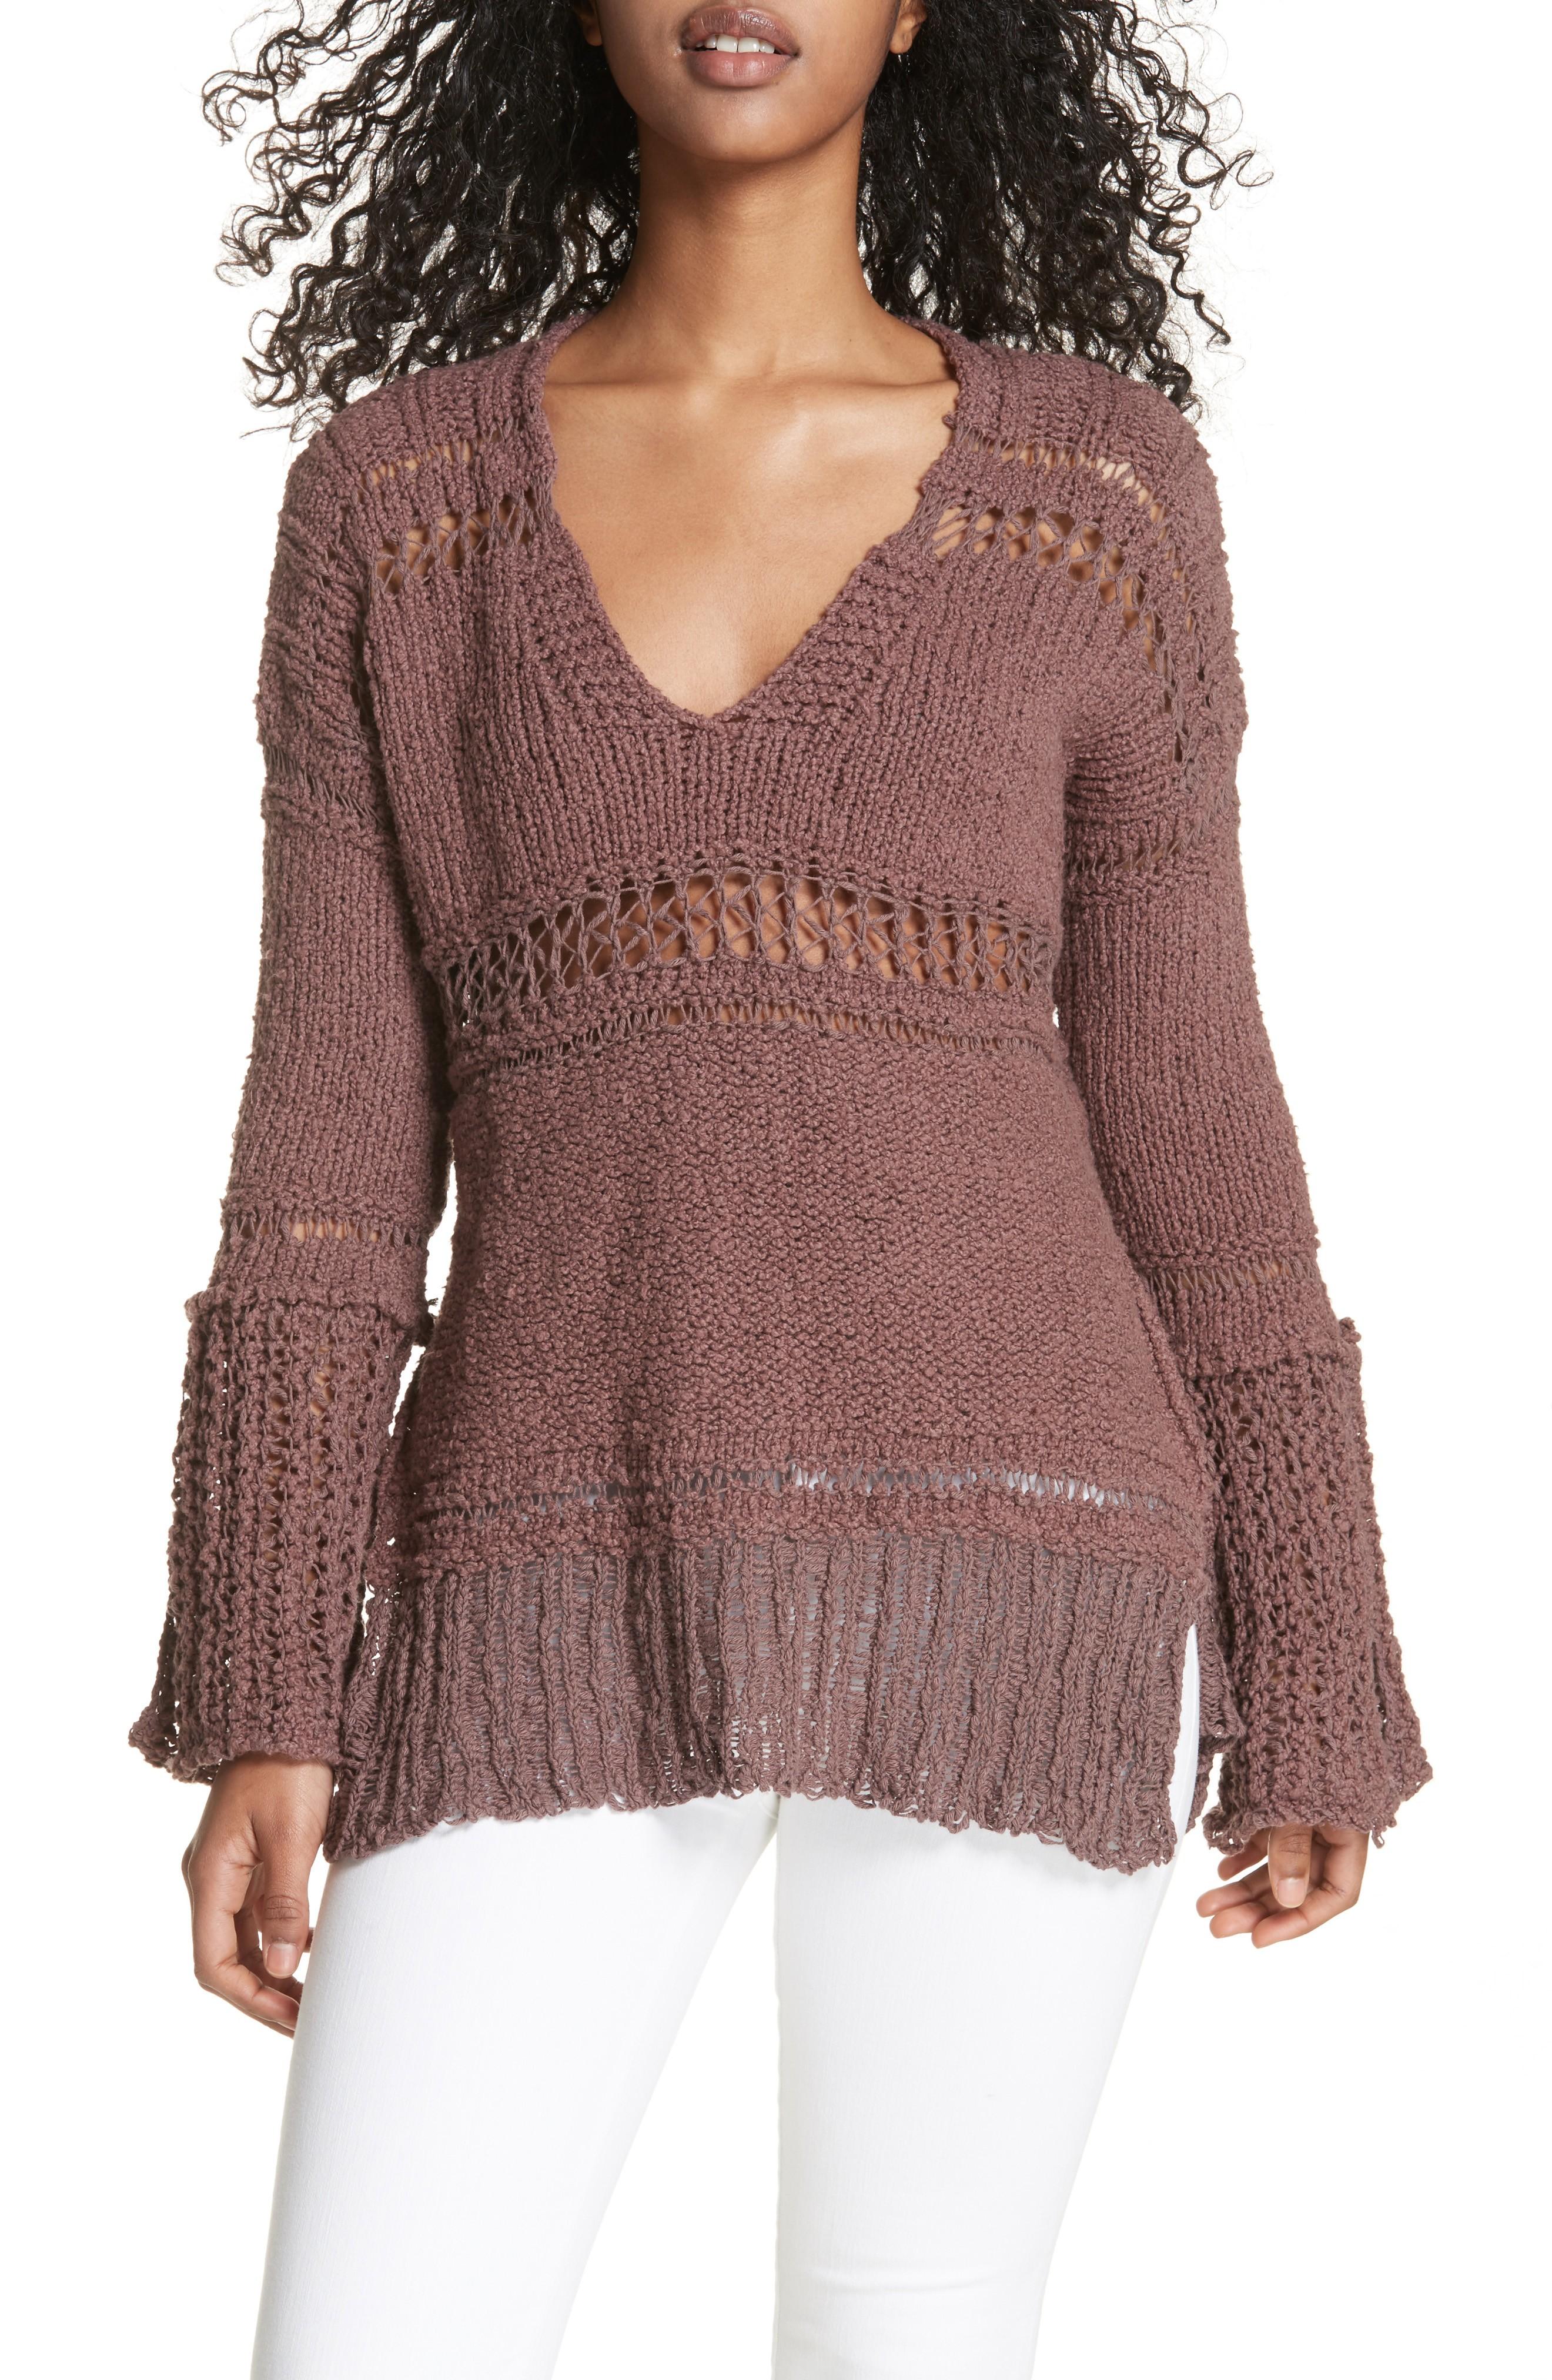 Details about   new Free People women sweater shirt OB1072402 1020 frappucino beige sz XS $108